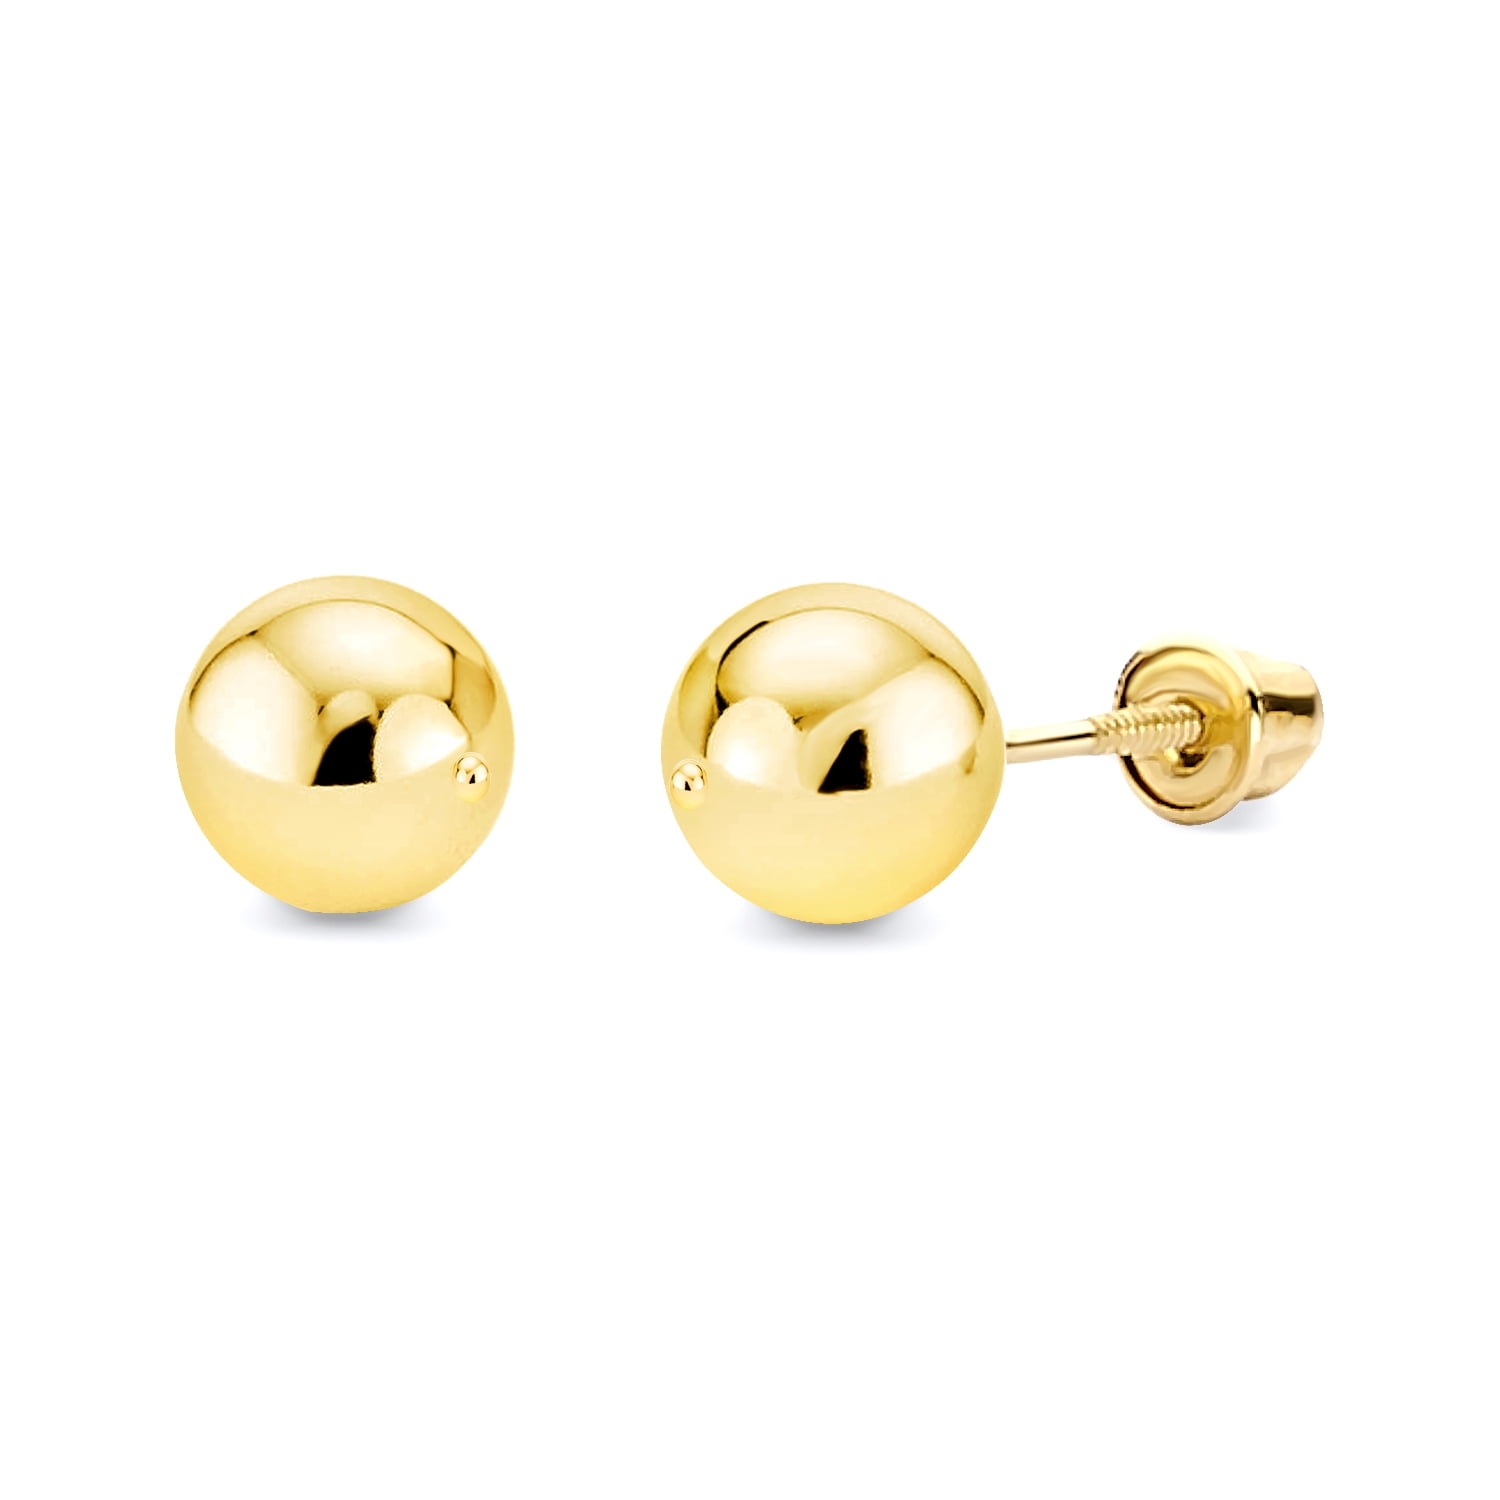 Wellingsale 14K Yellow Gold Polished 6mm Ball Stud Earrings With Screw ...